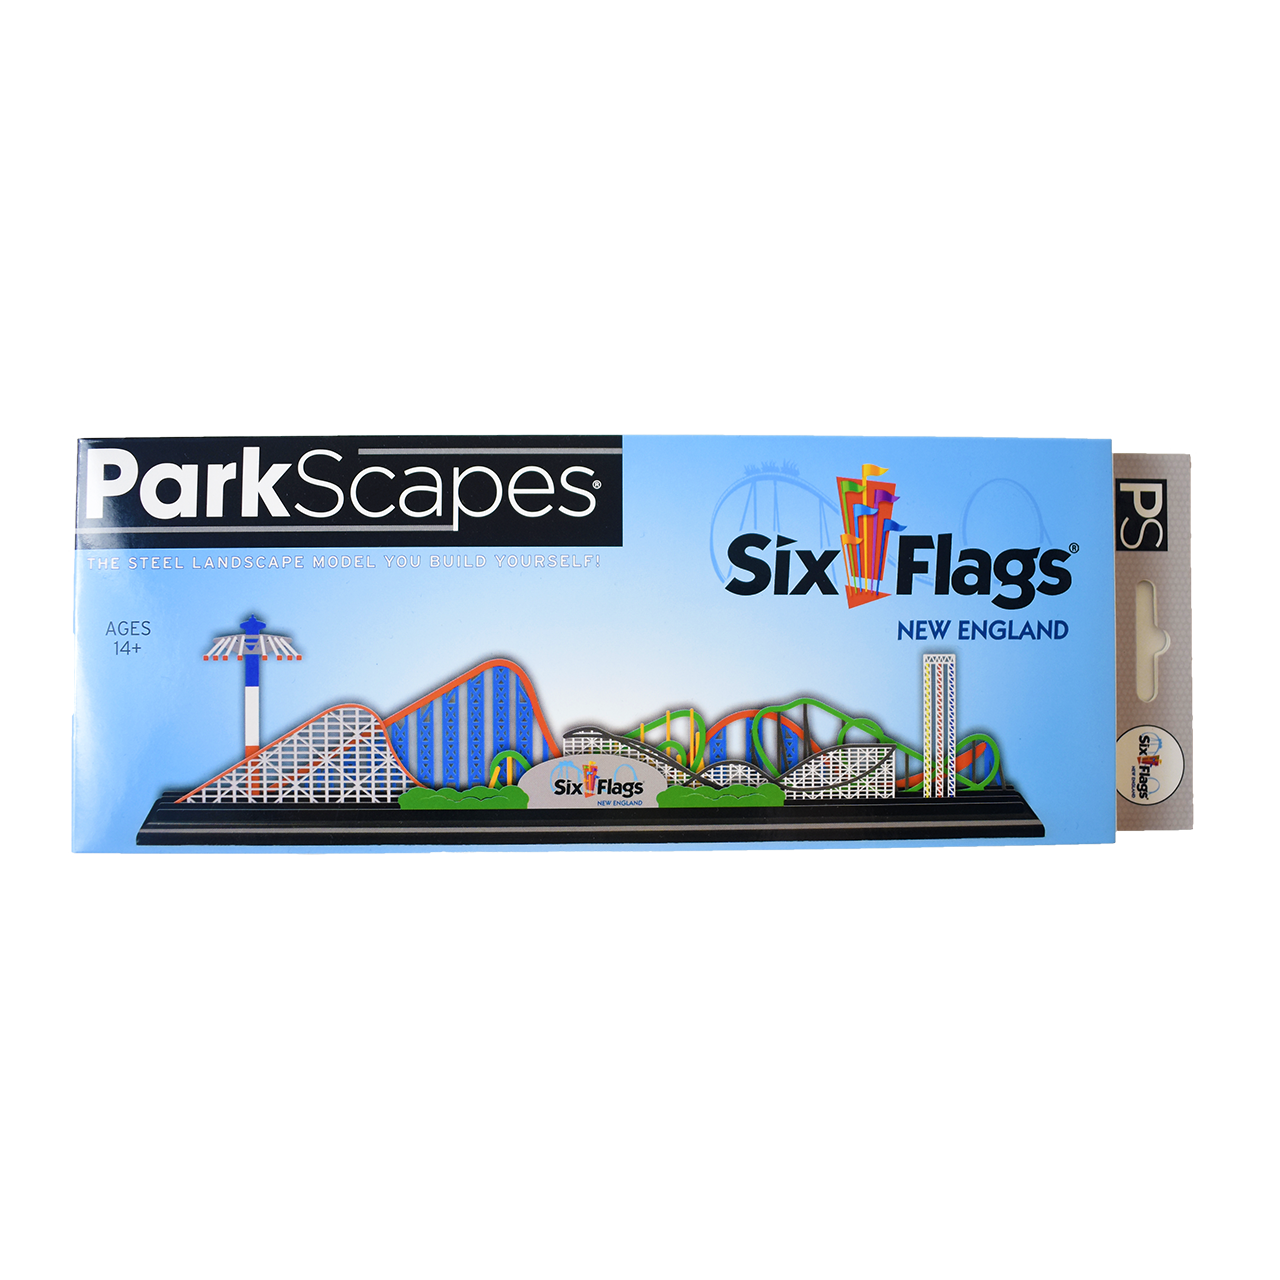 SIX FLAGS PARKSCAPES - NEW ENGLAND package front